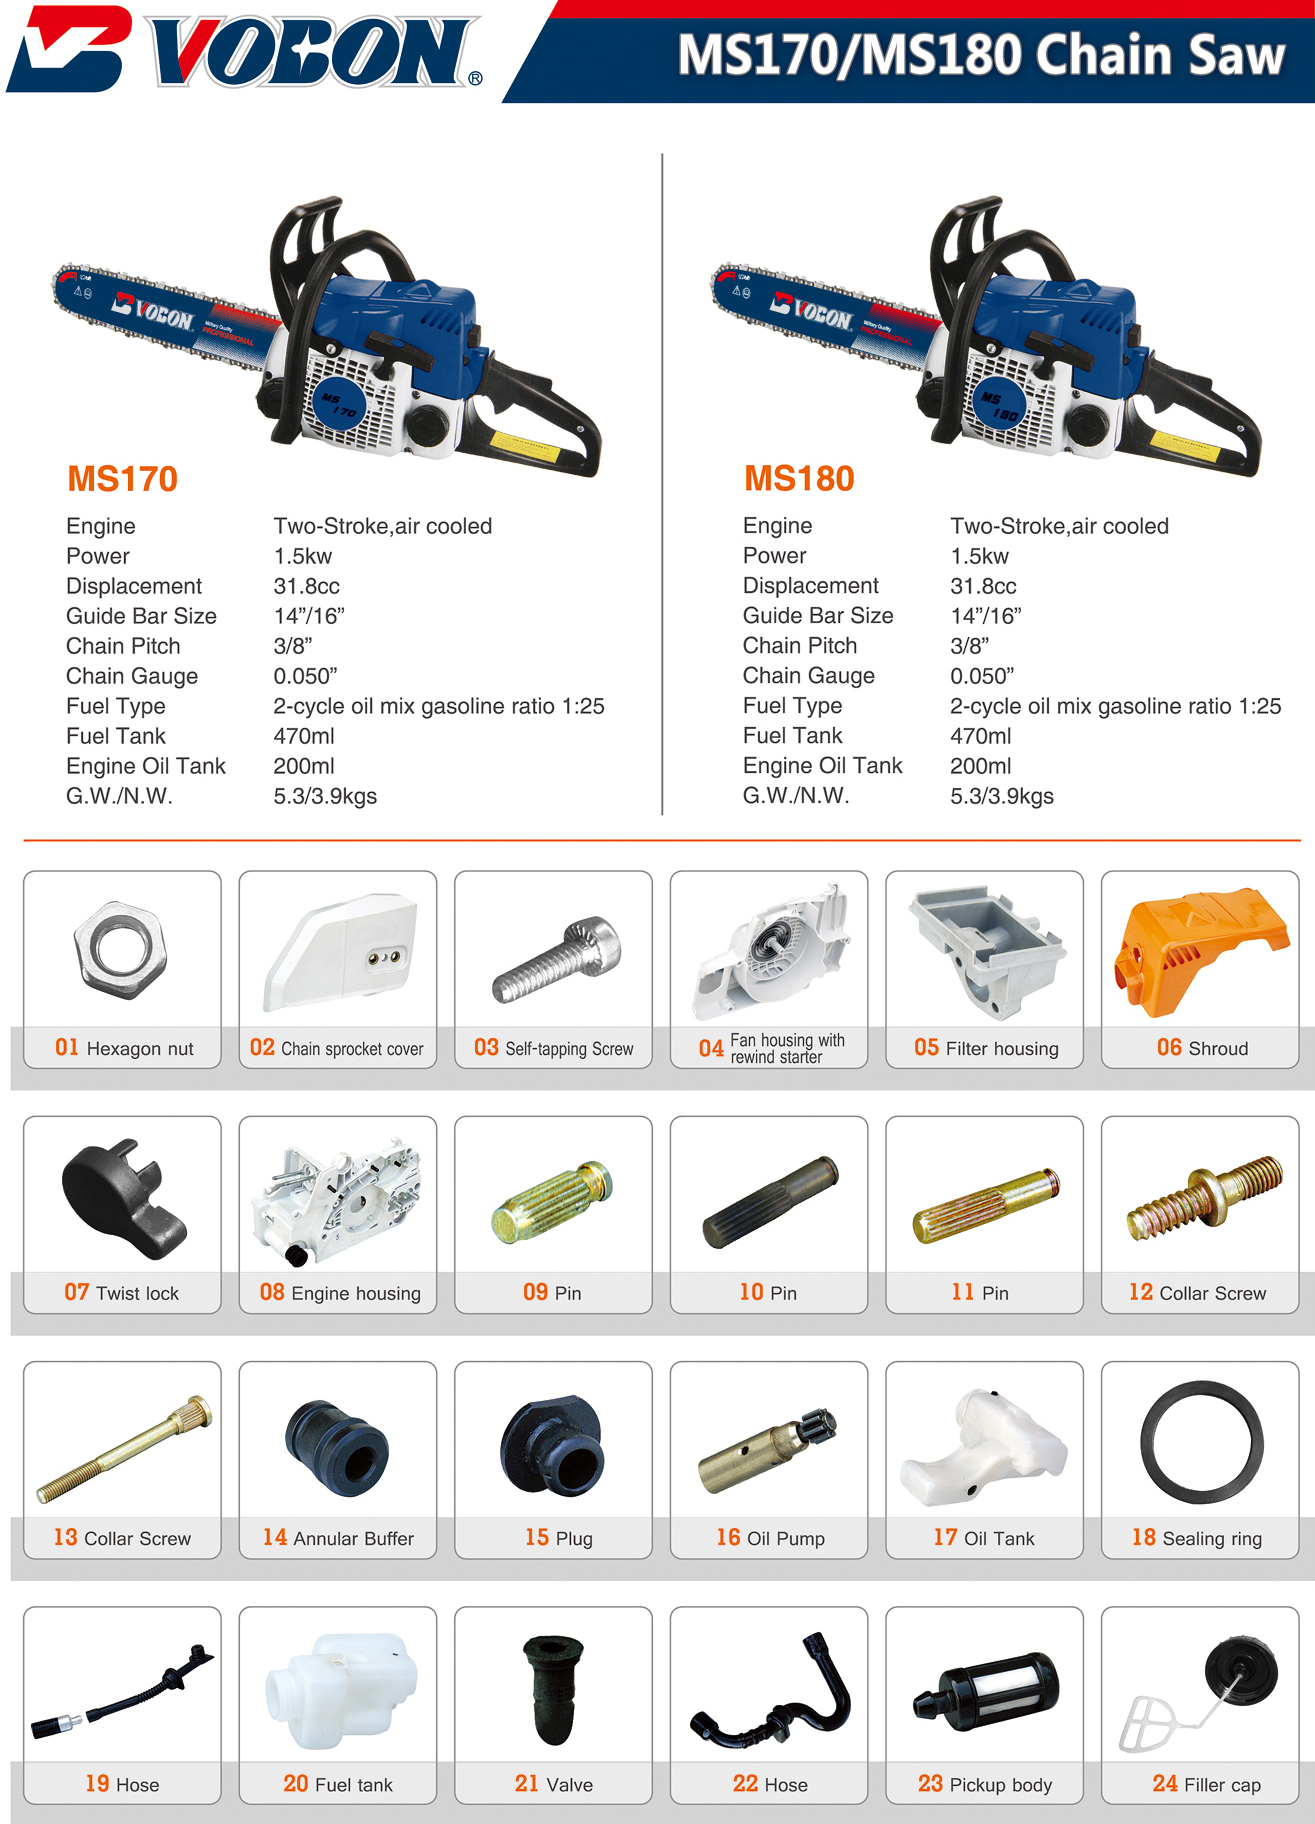 MS170MS180 Chain Saw